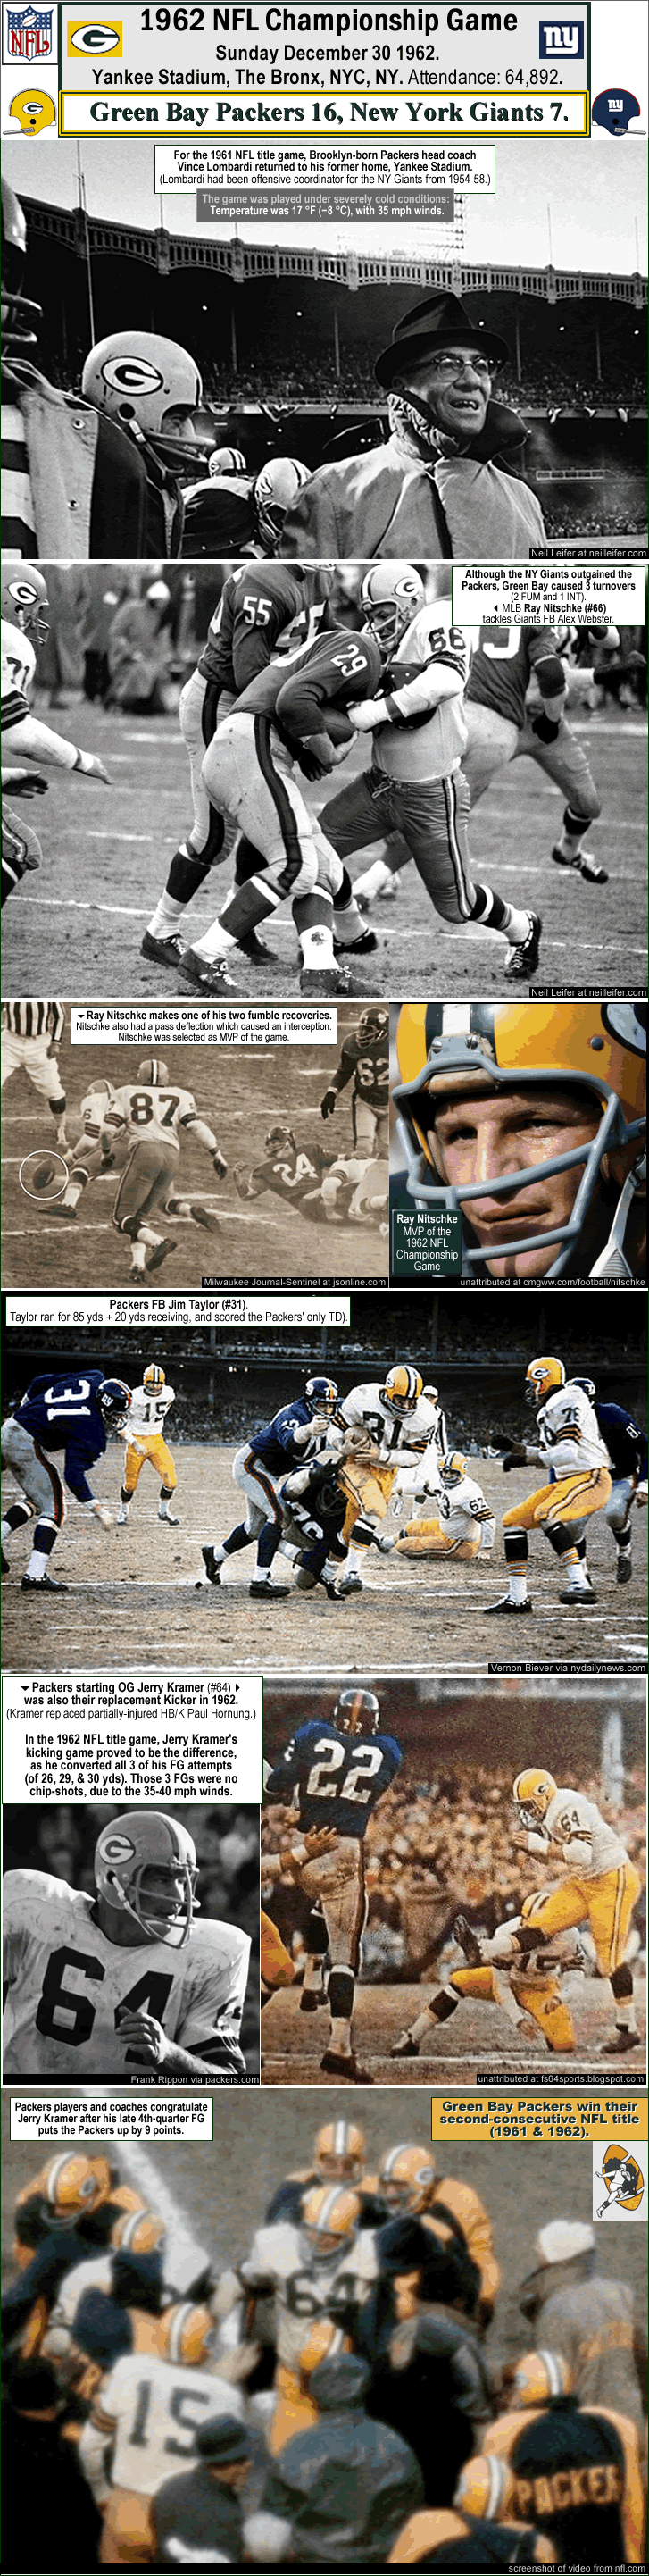 green-bay-packers_1962_nfl-title-winners_packers-16_ny-giants-7_yankee-stadium_vince-lombardi_ray-nitschke_jim-taylor_jerry-kramer_h_.gif